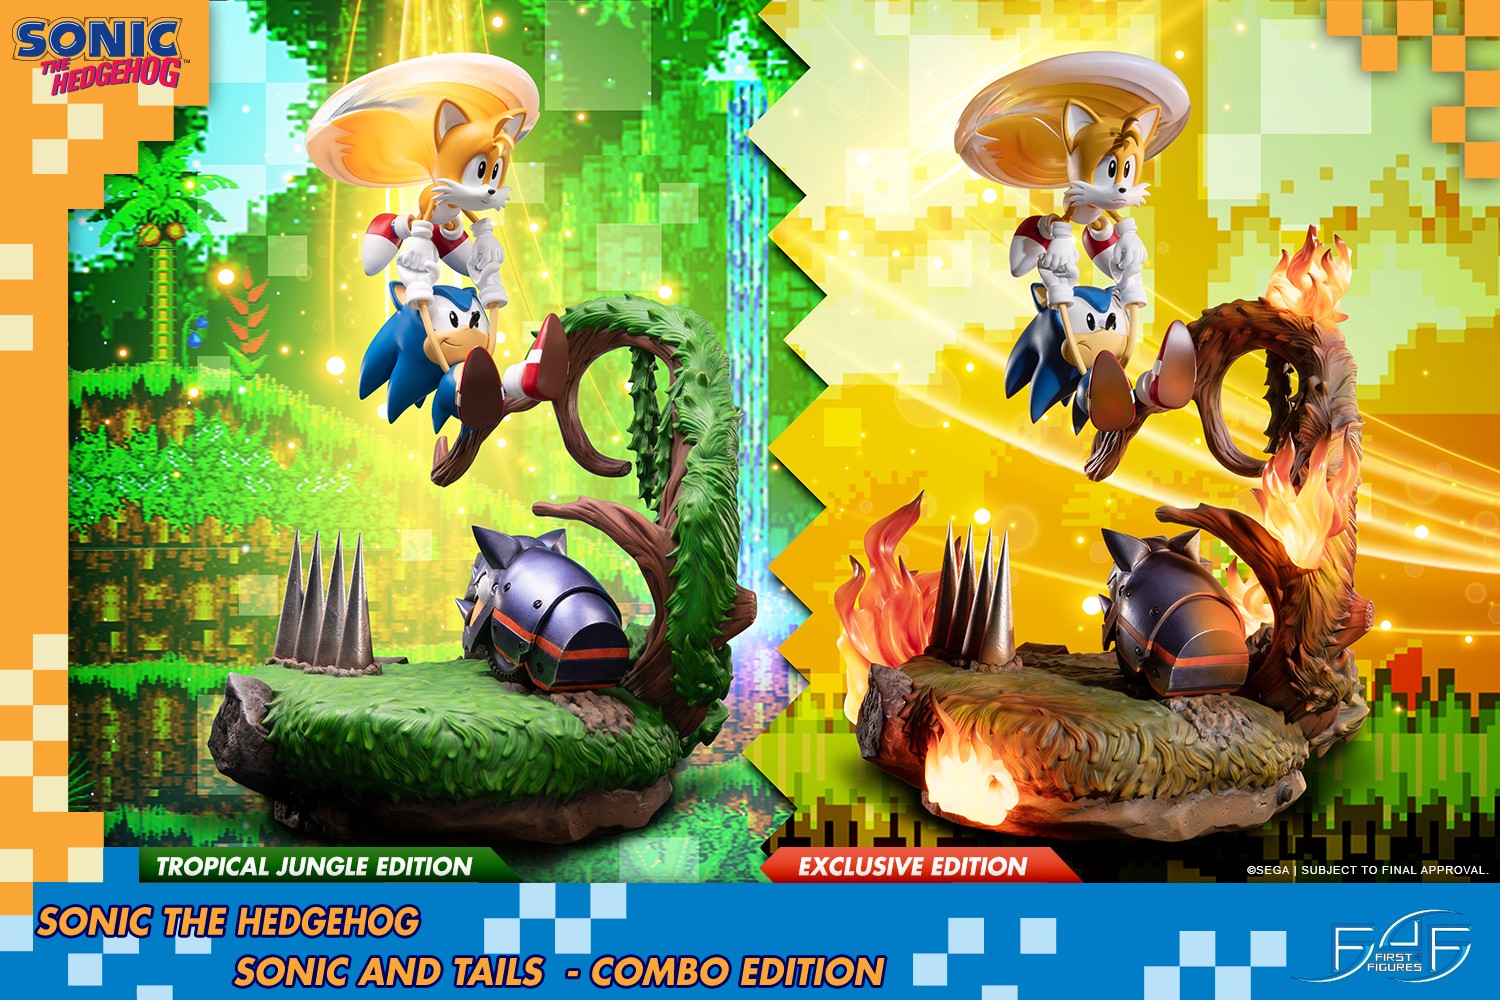 Sonic the Hedgehog – Sonic and Tails Combo Edition